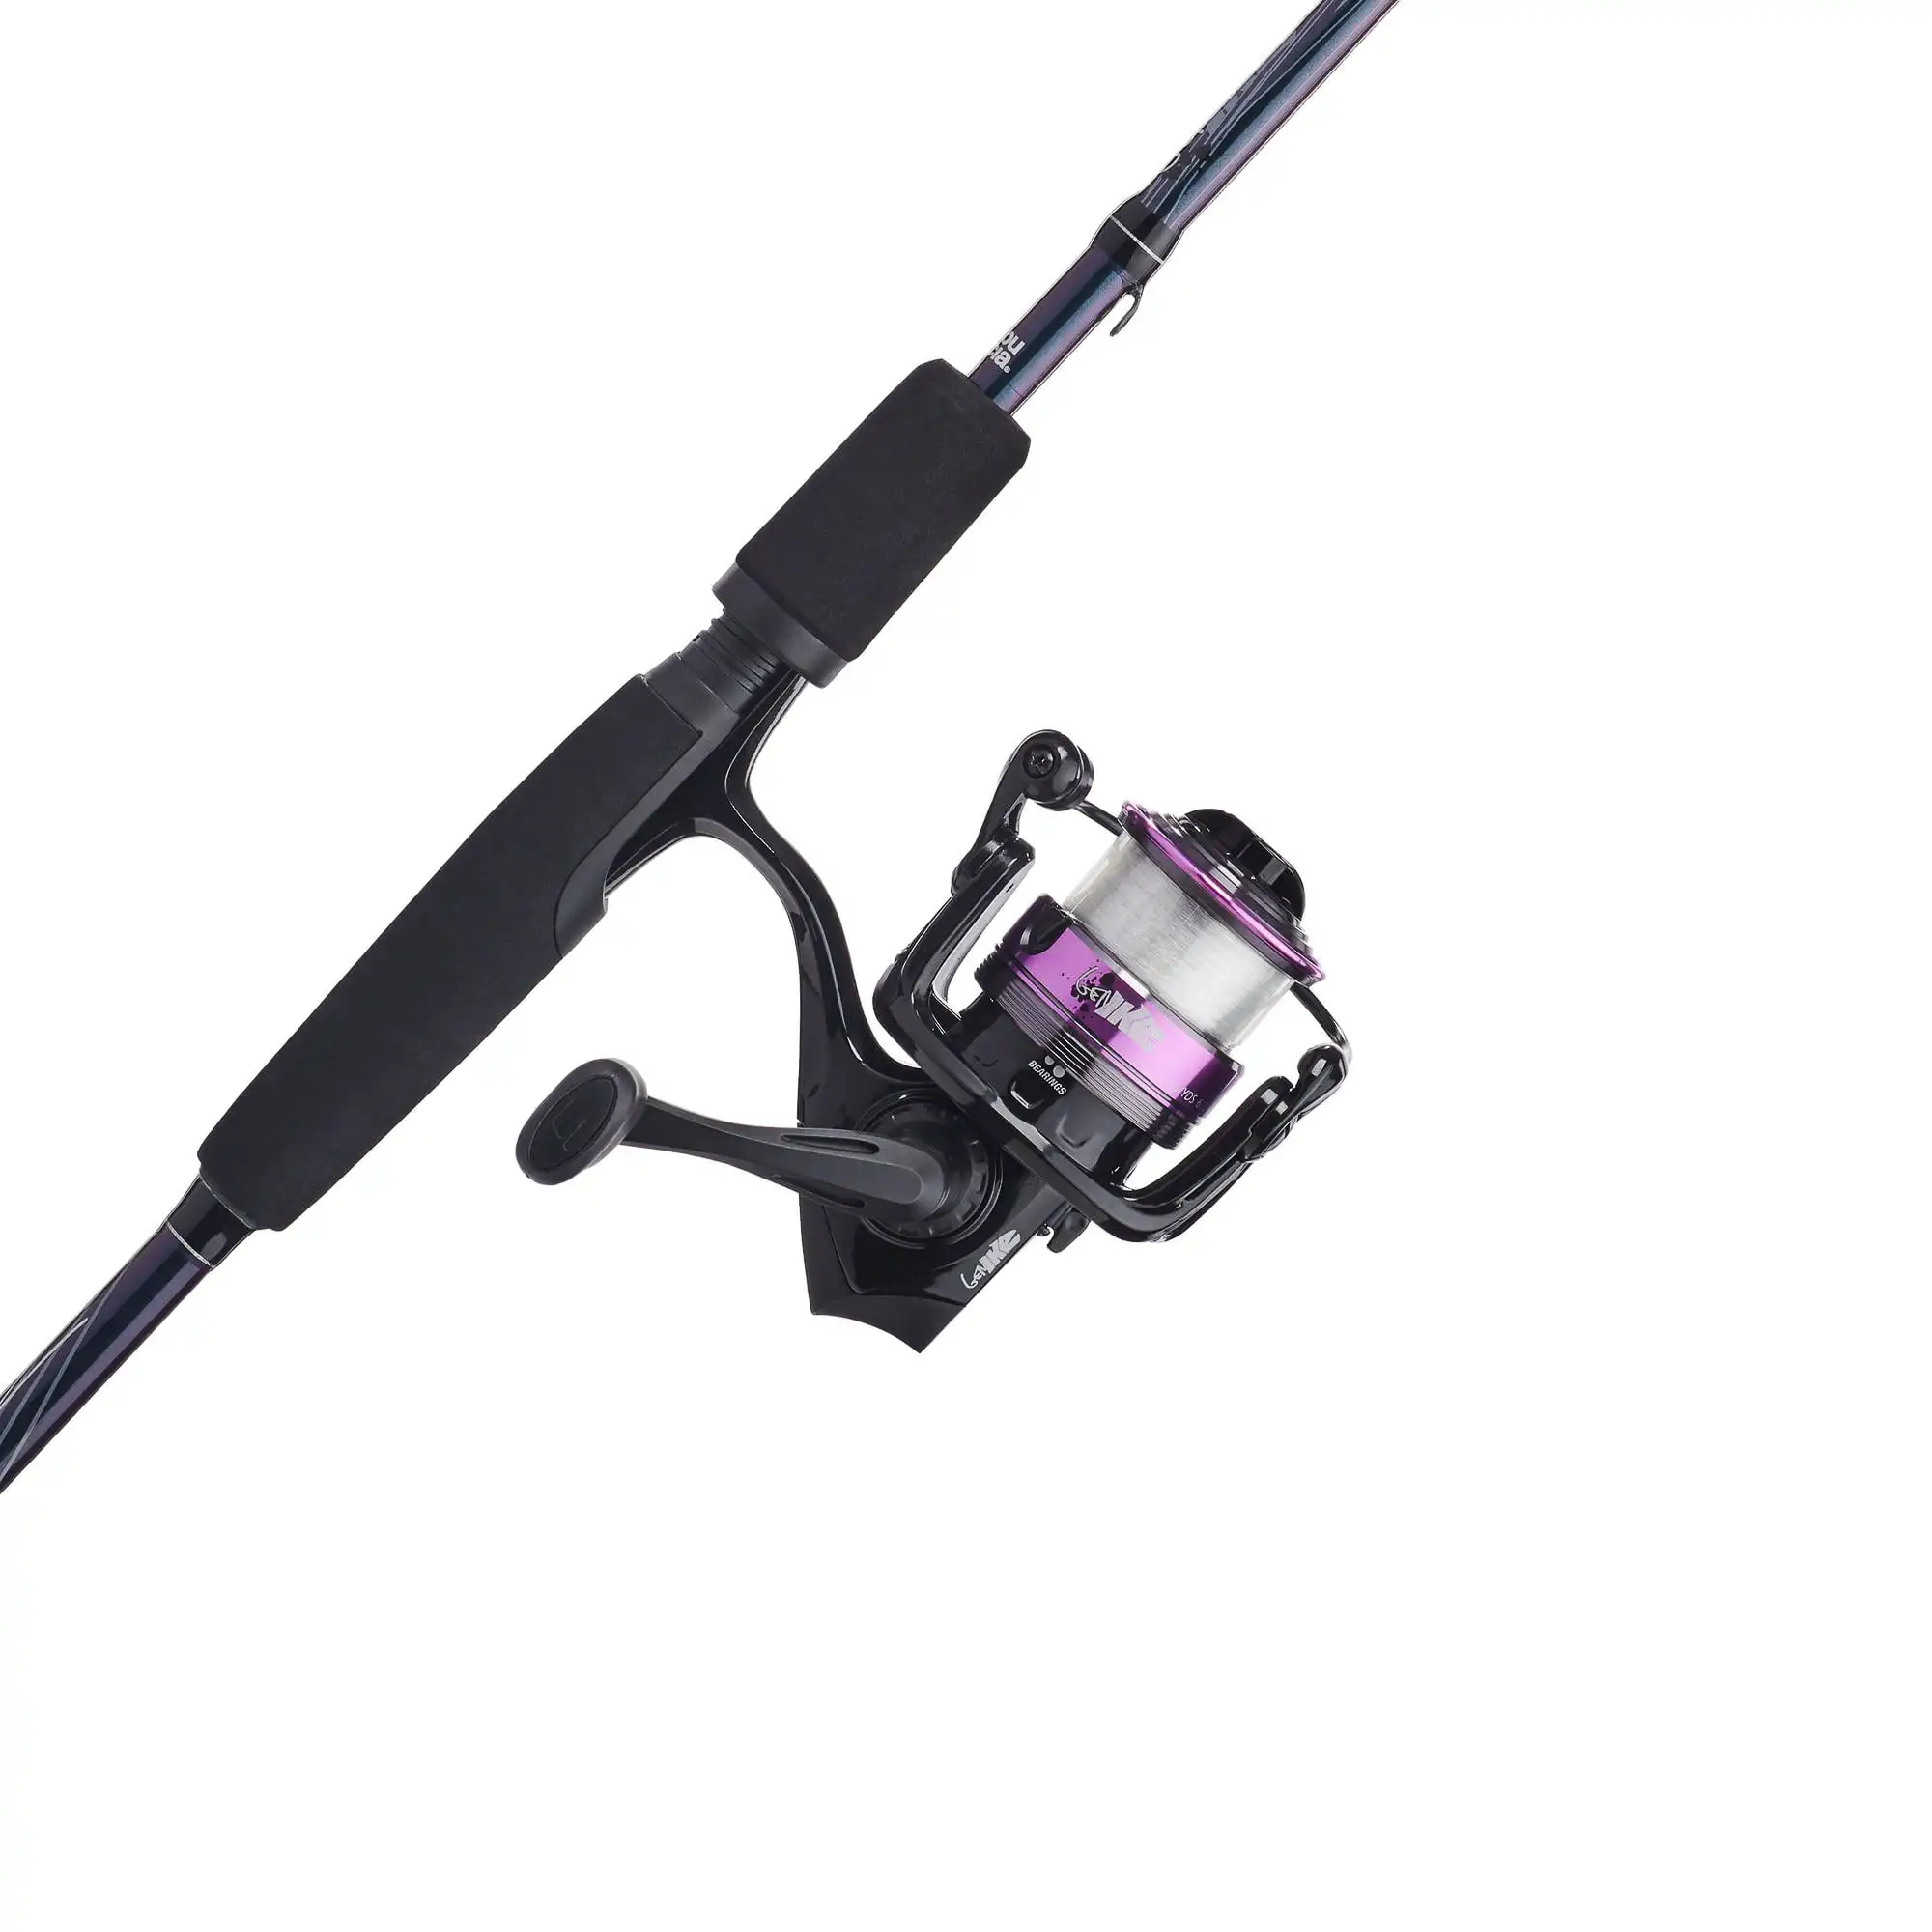 6’6” Gen Ike Youth Fishing Rod and Reel Spinning Combo